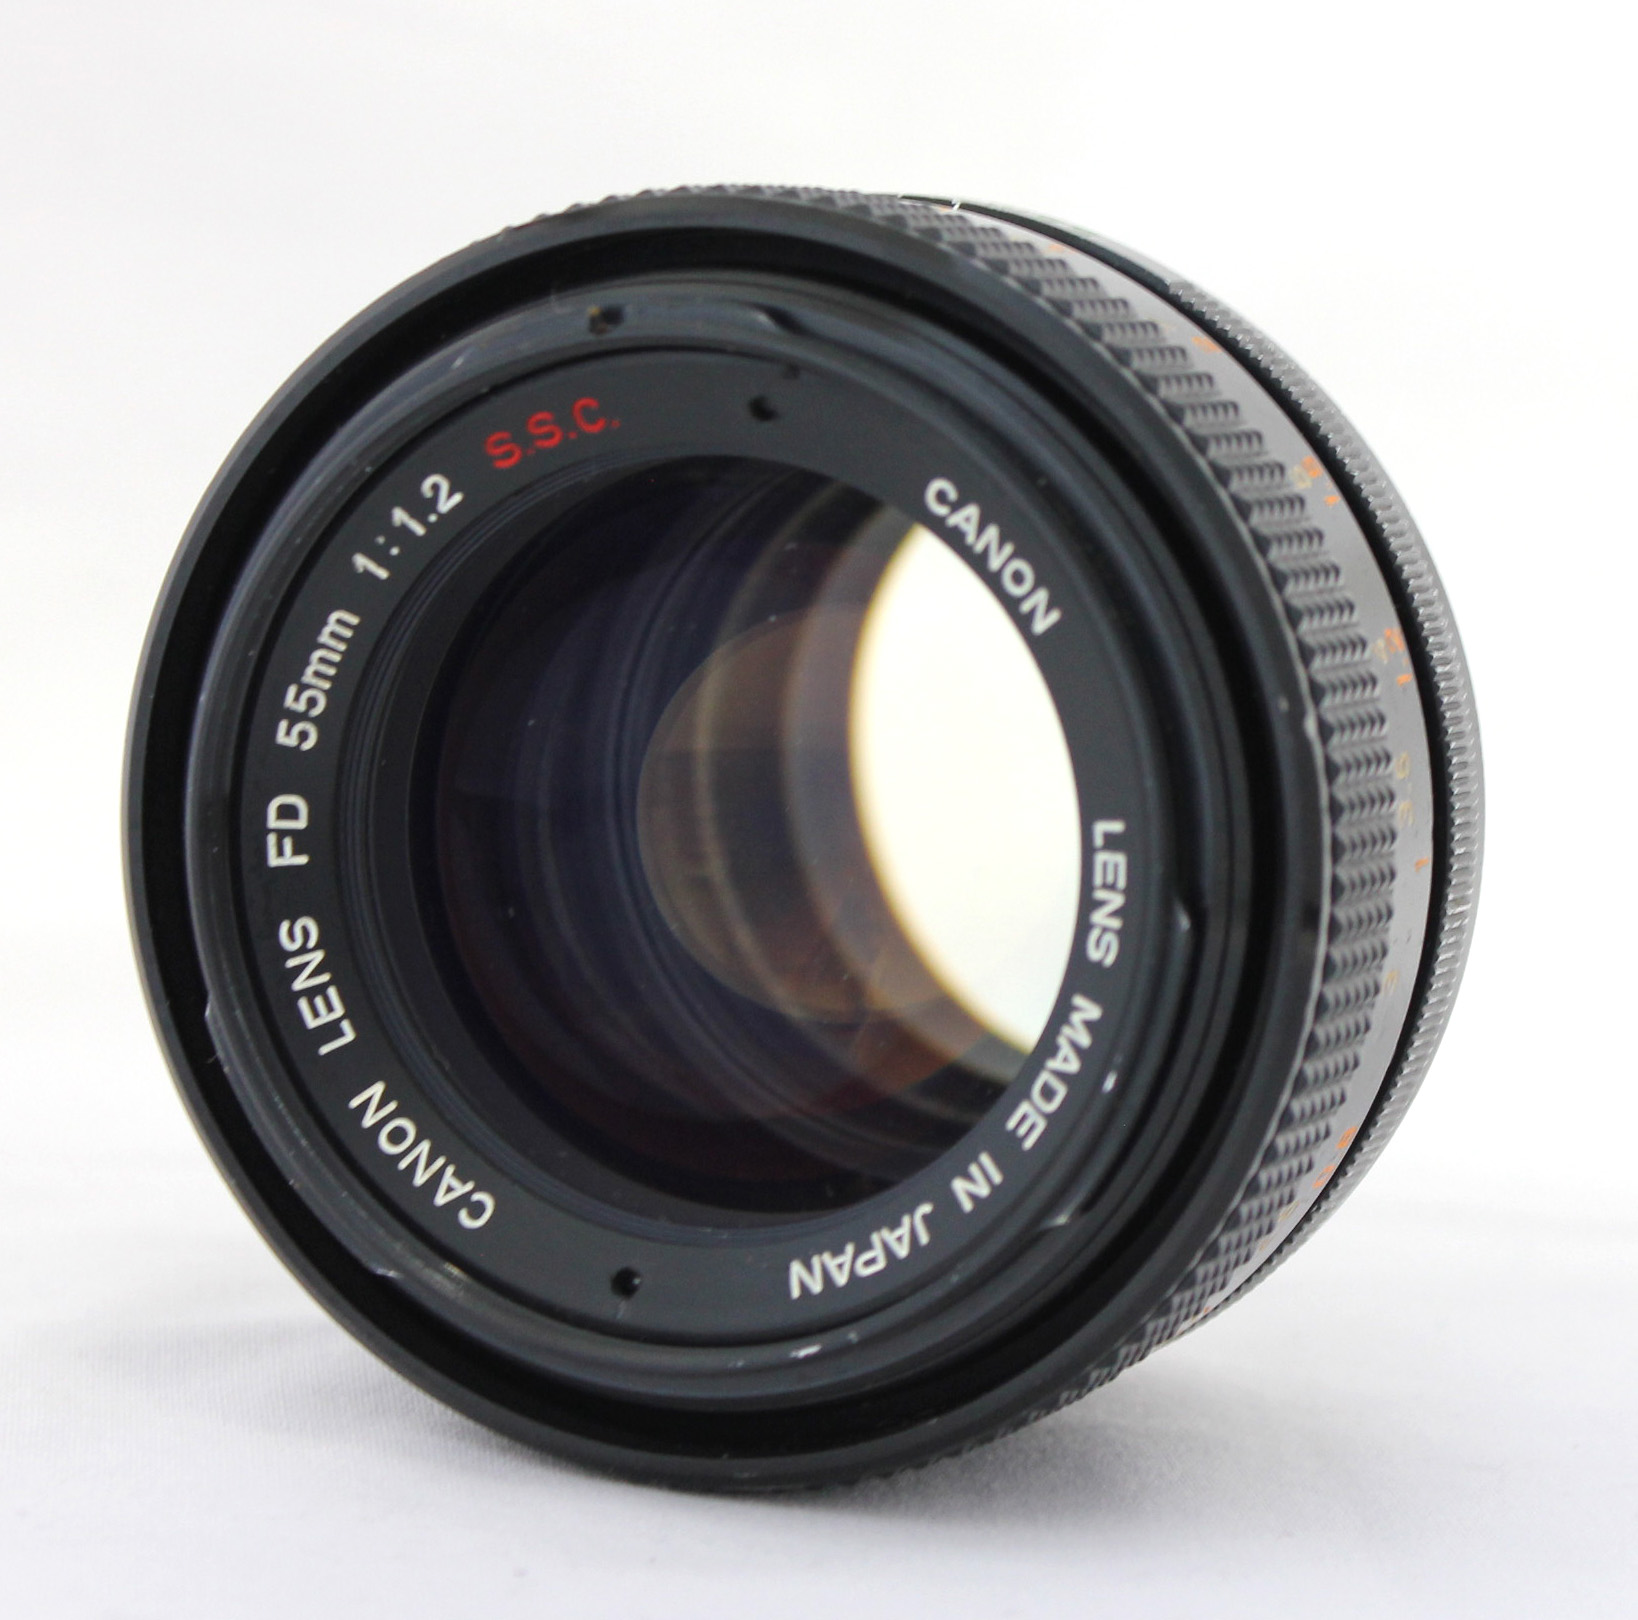 [Rare "O"] Canon FD 55mm F/1.2 S.S.C. ssc MF Standard Prime Lens from Japan